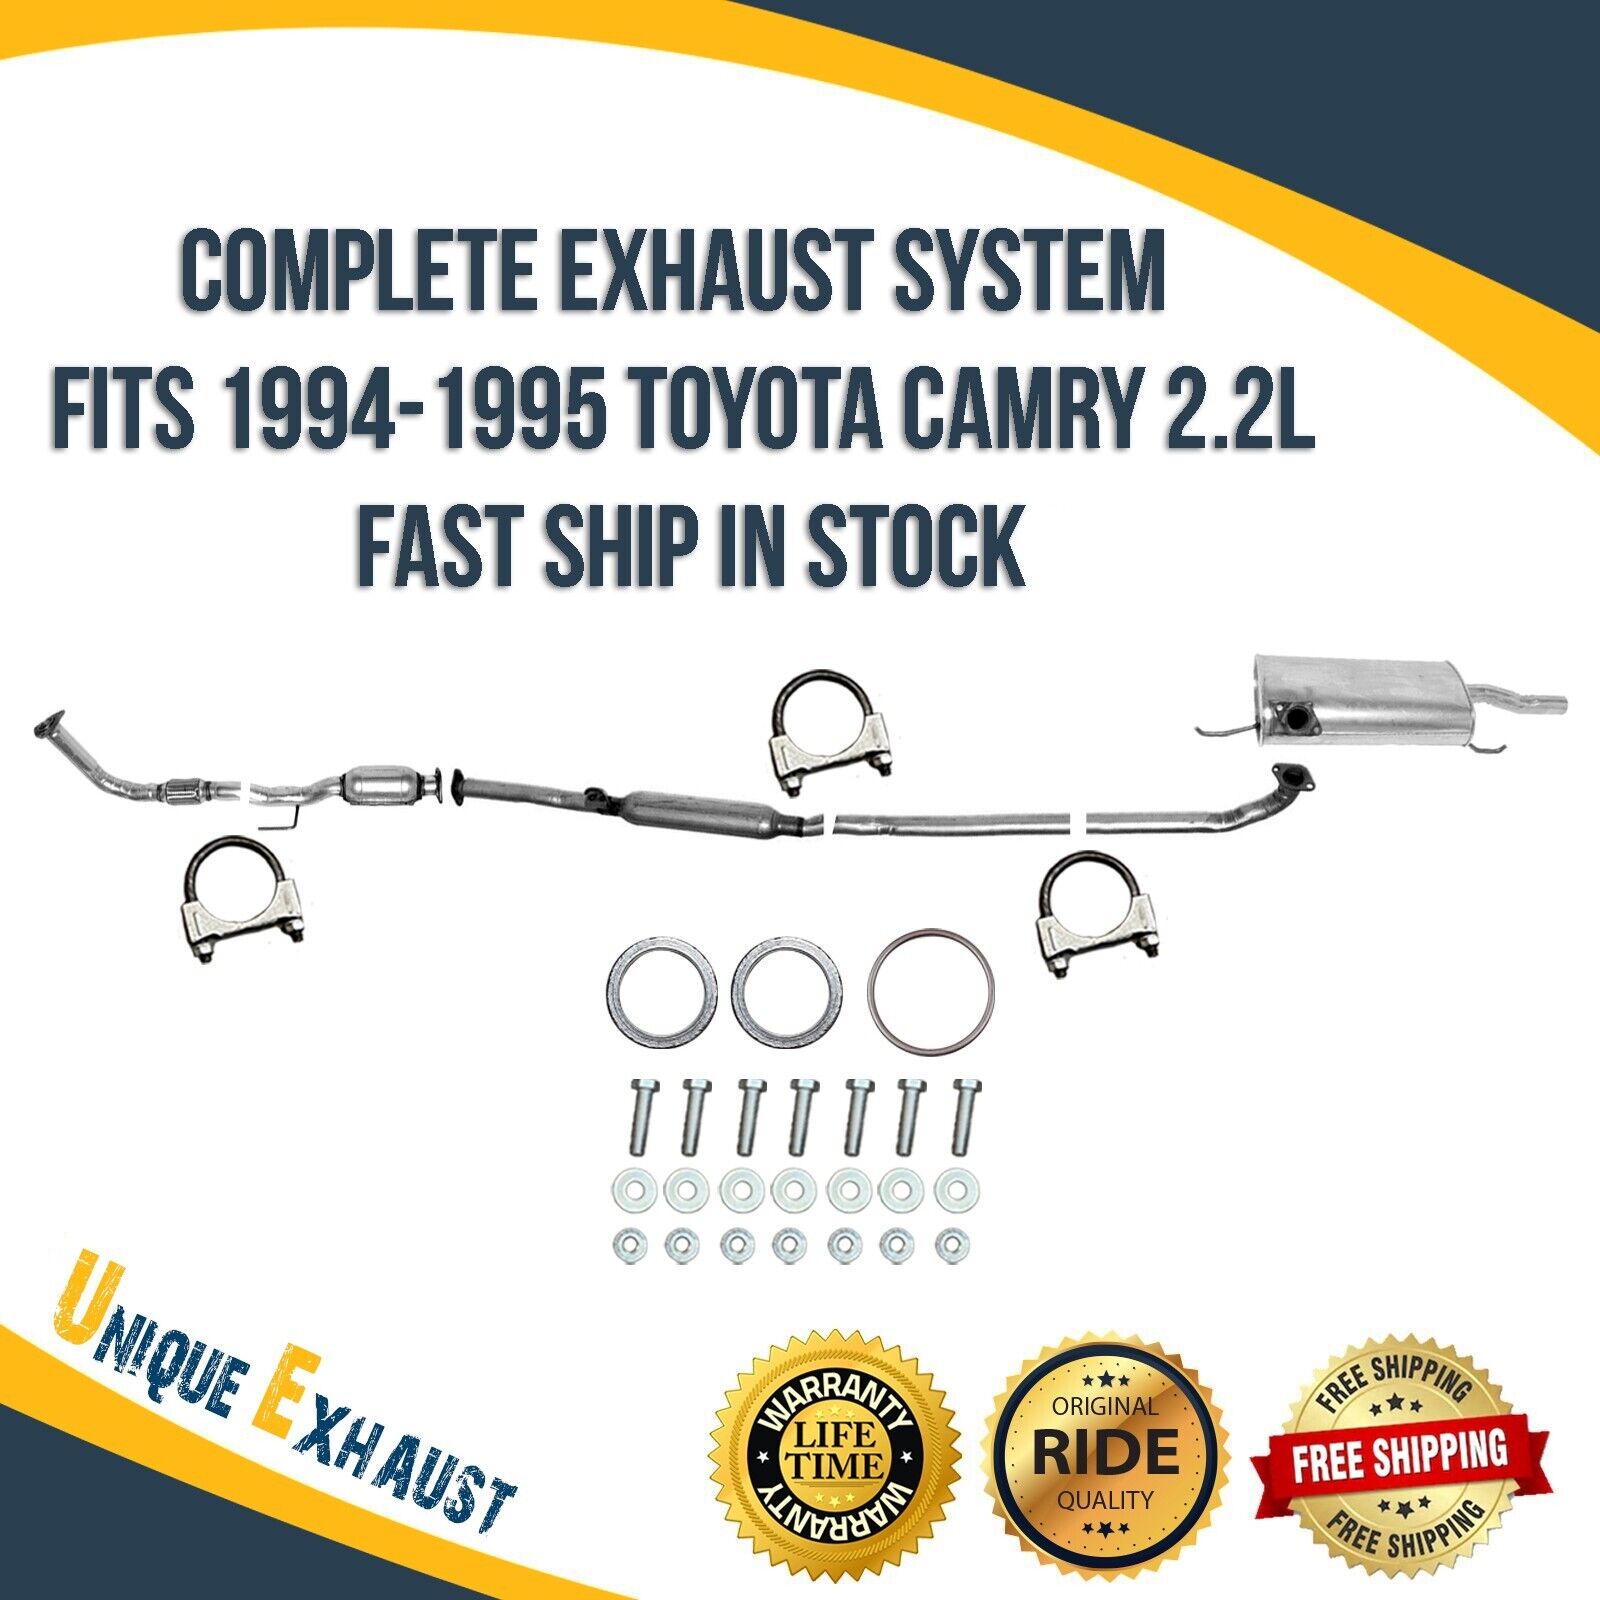 Complete Exhaust System Fits 1994-1995 Toyota Camry 2.2L Fast Ship In Stock